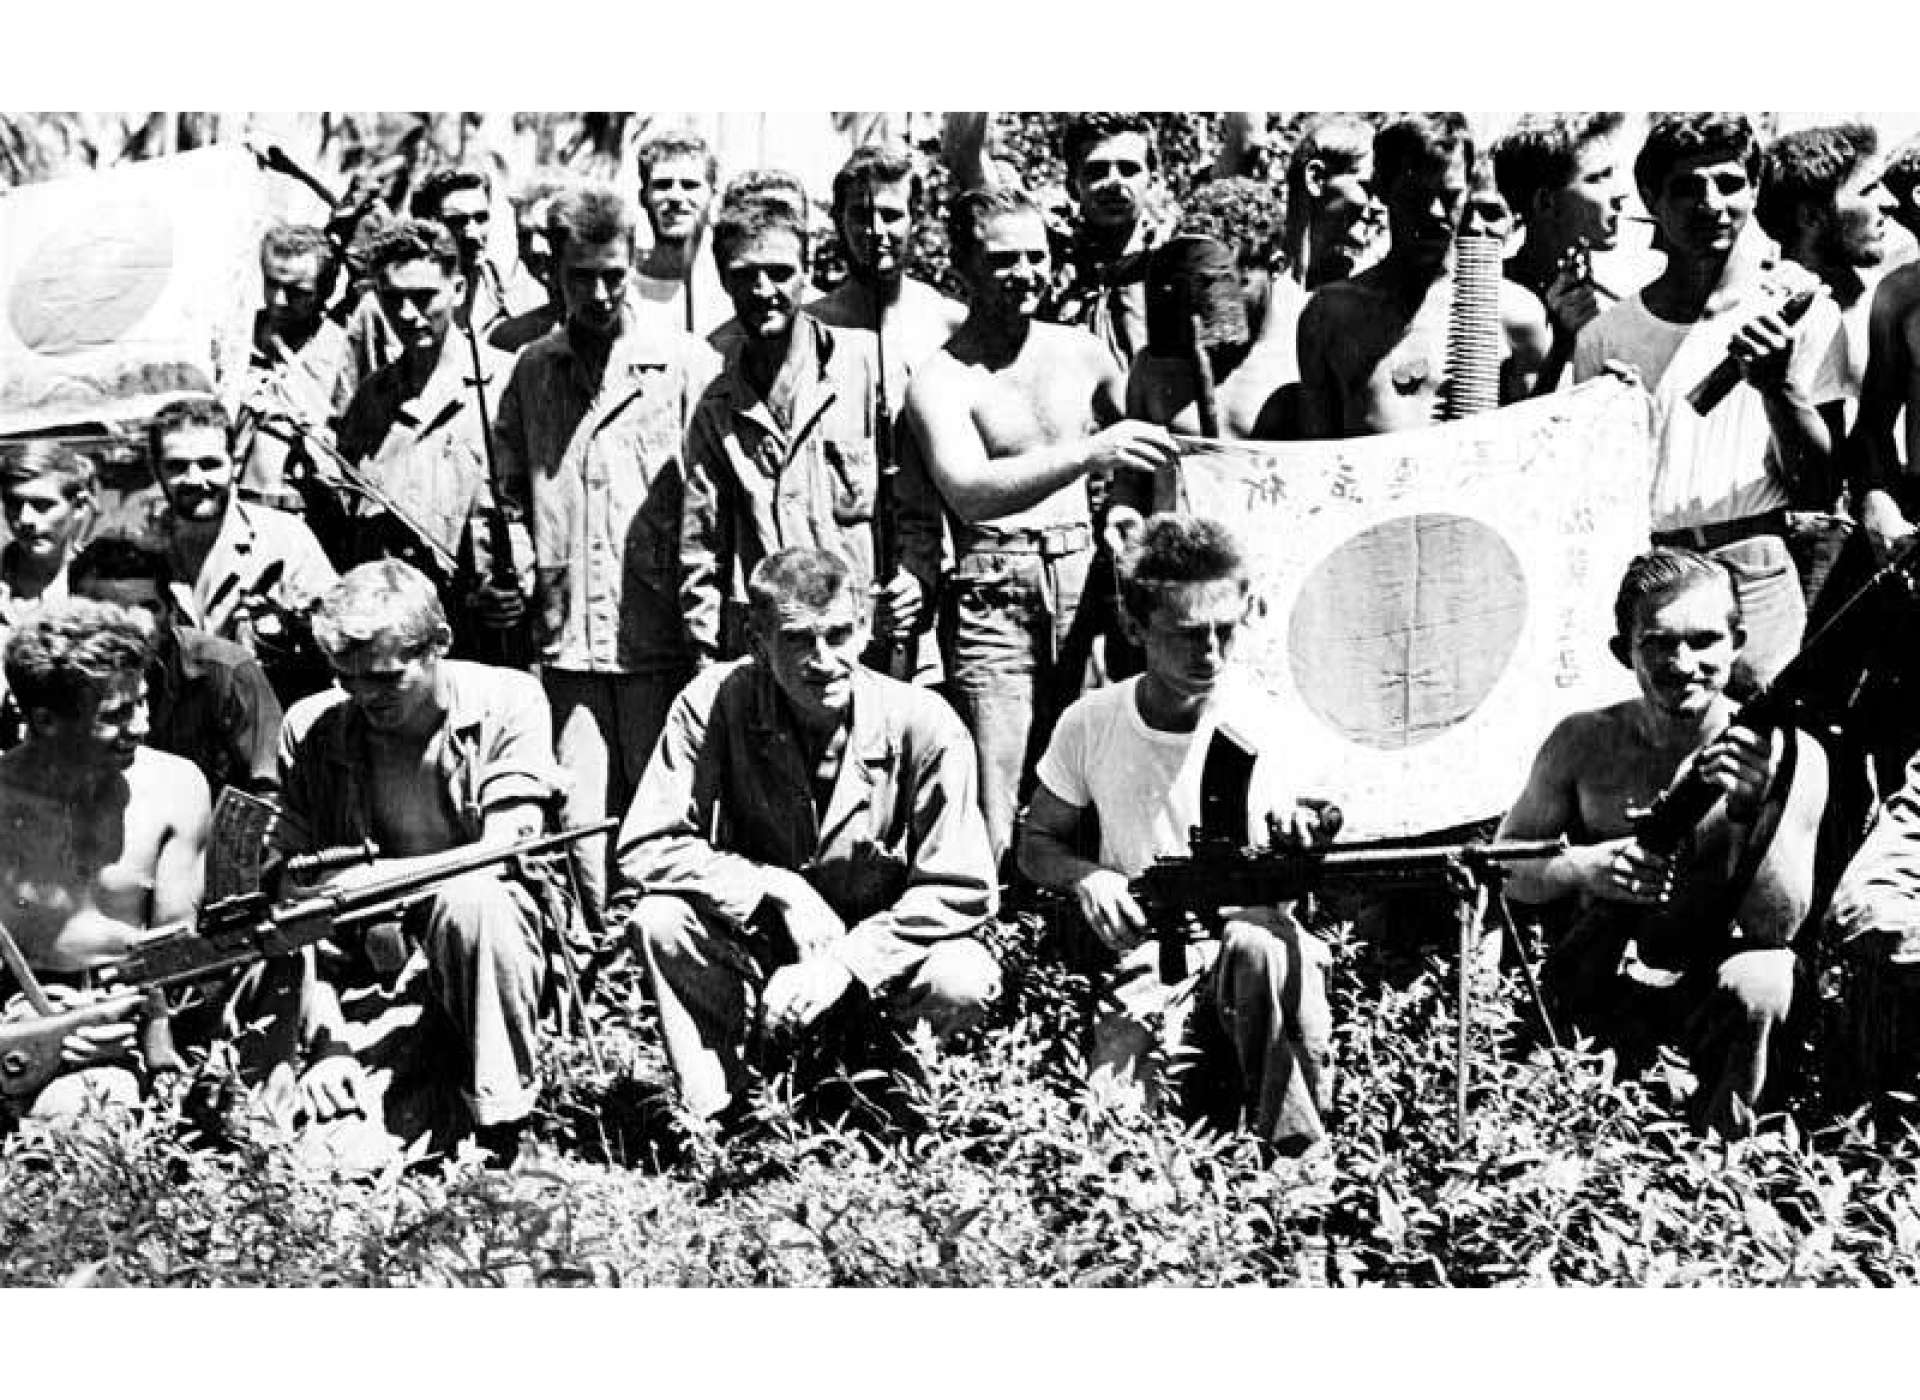 Carlson’s Raiders with their trophies, including Japanese Type 96 machine guns and flags, courtesy of the National WWII Museum.